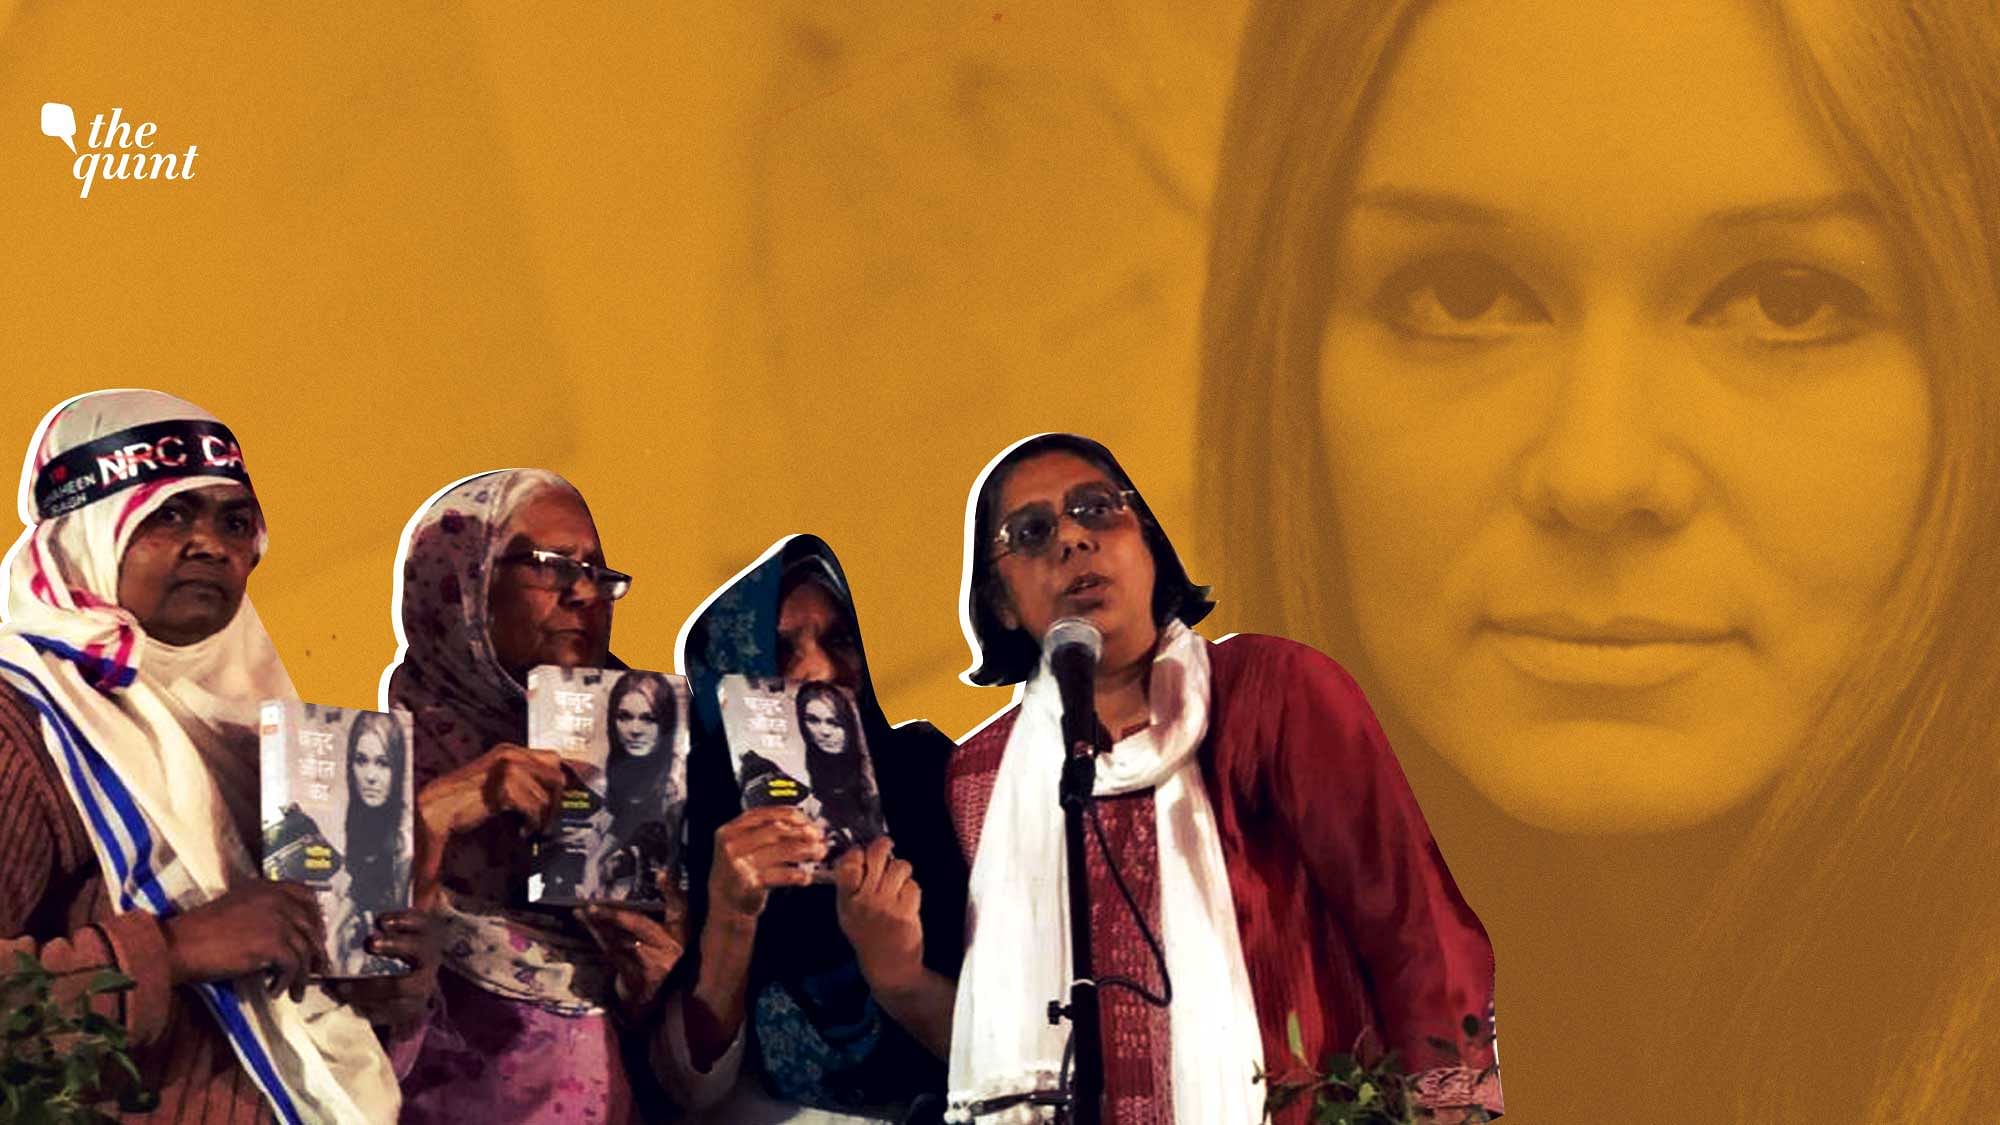 Image of journalist Ruchira Gupta (extreme R) with the ‘Dabang Dadis’ of Shaheen Bagh (on the L) and an image of feminist icon Gloria Steinem in the background.